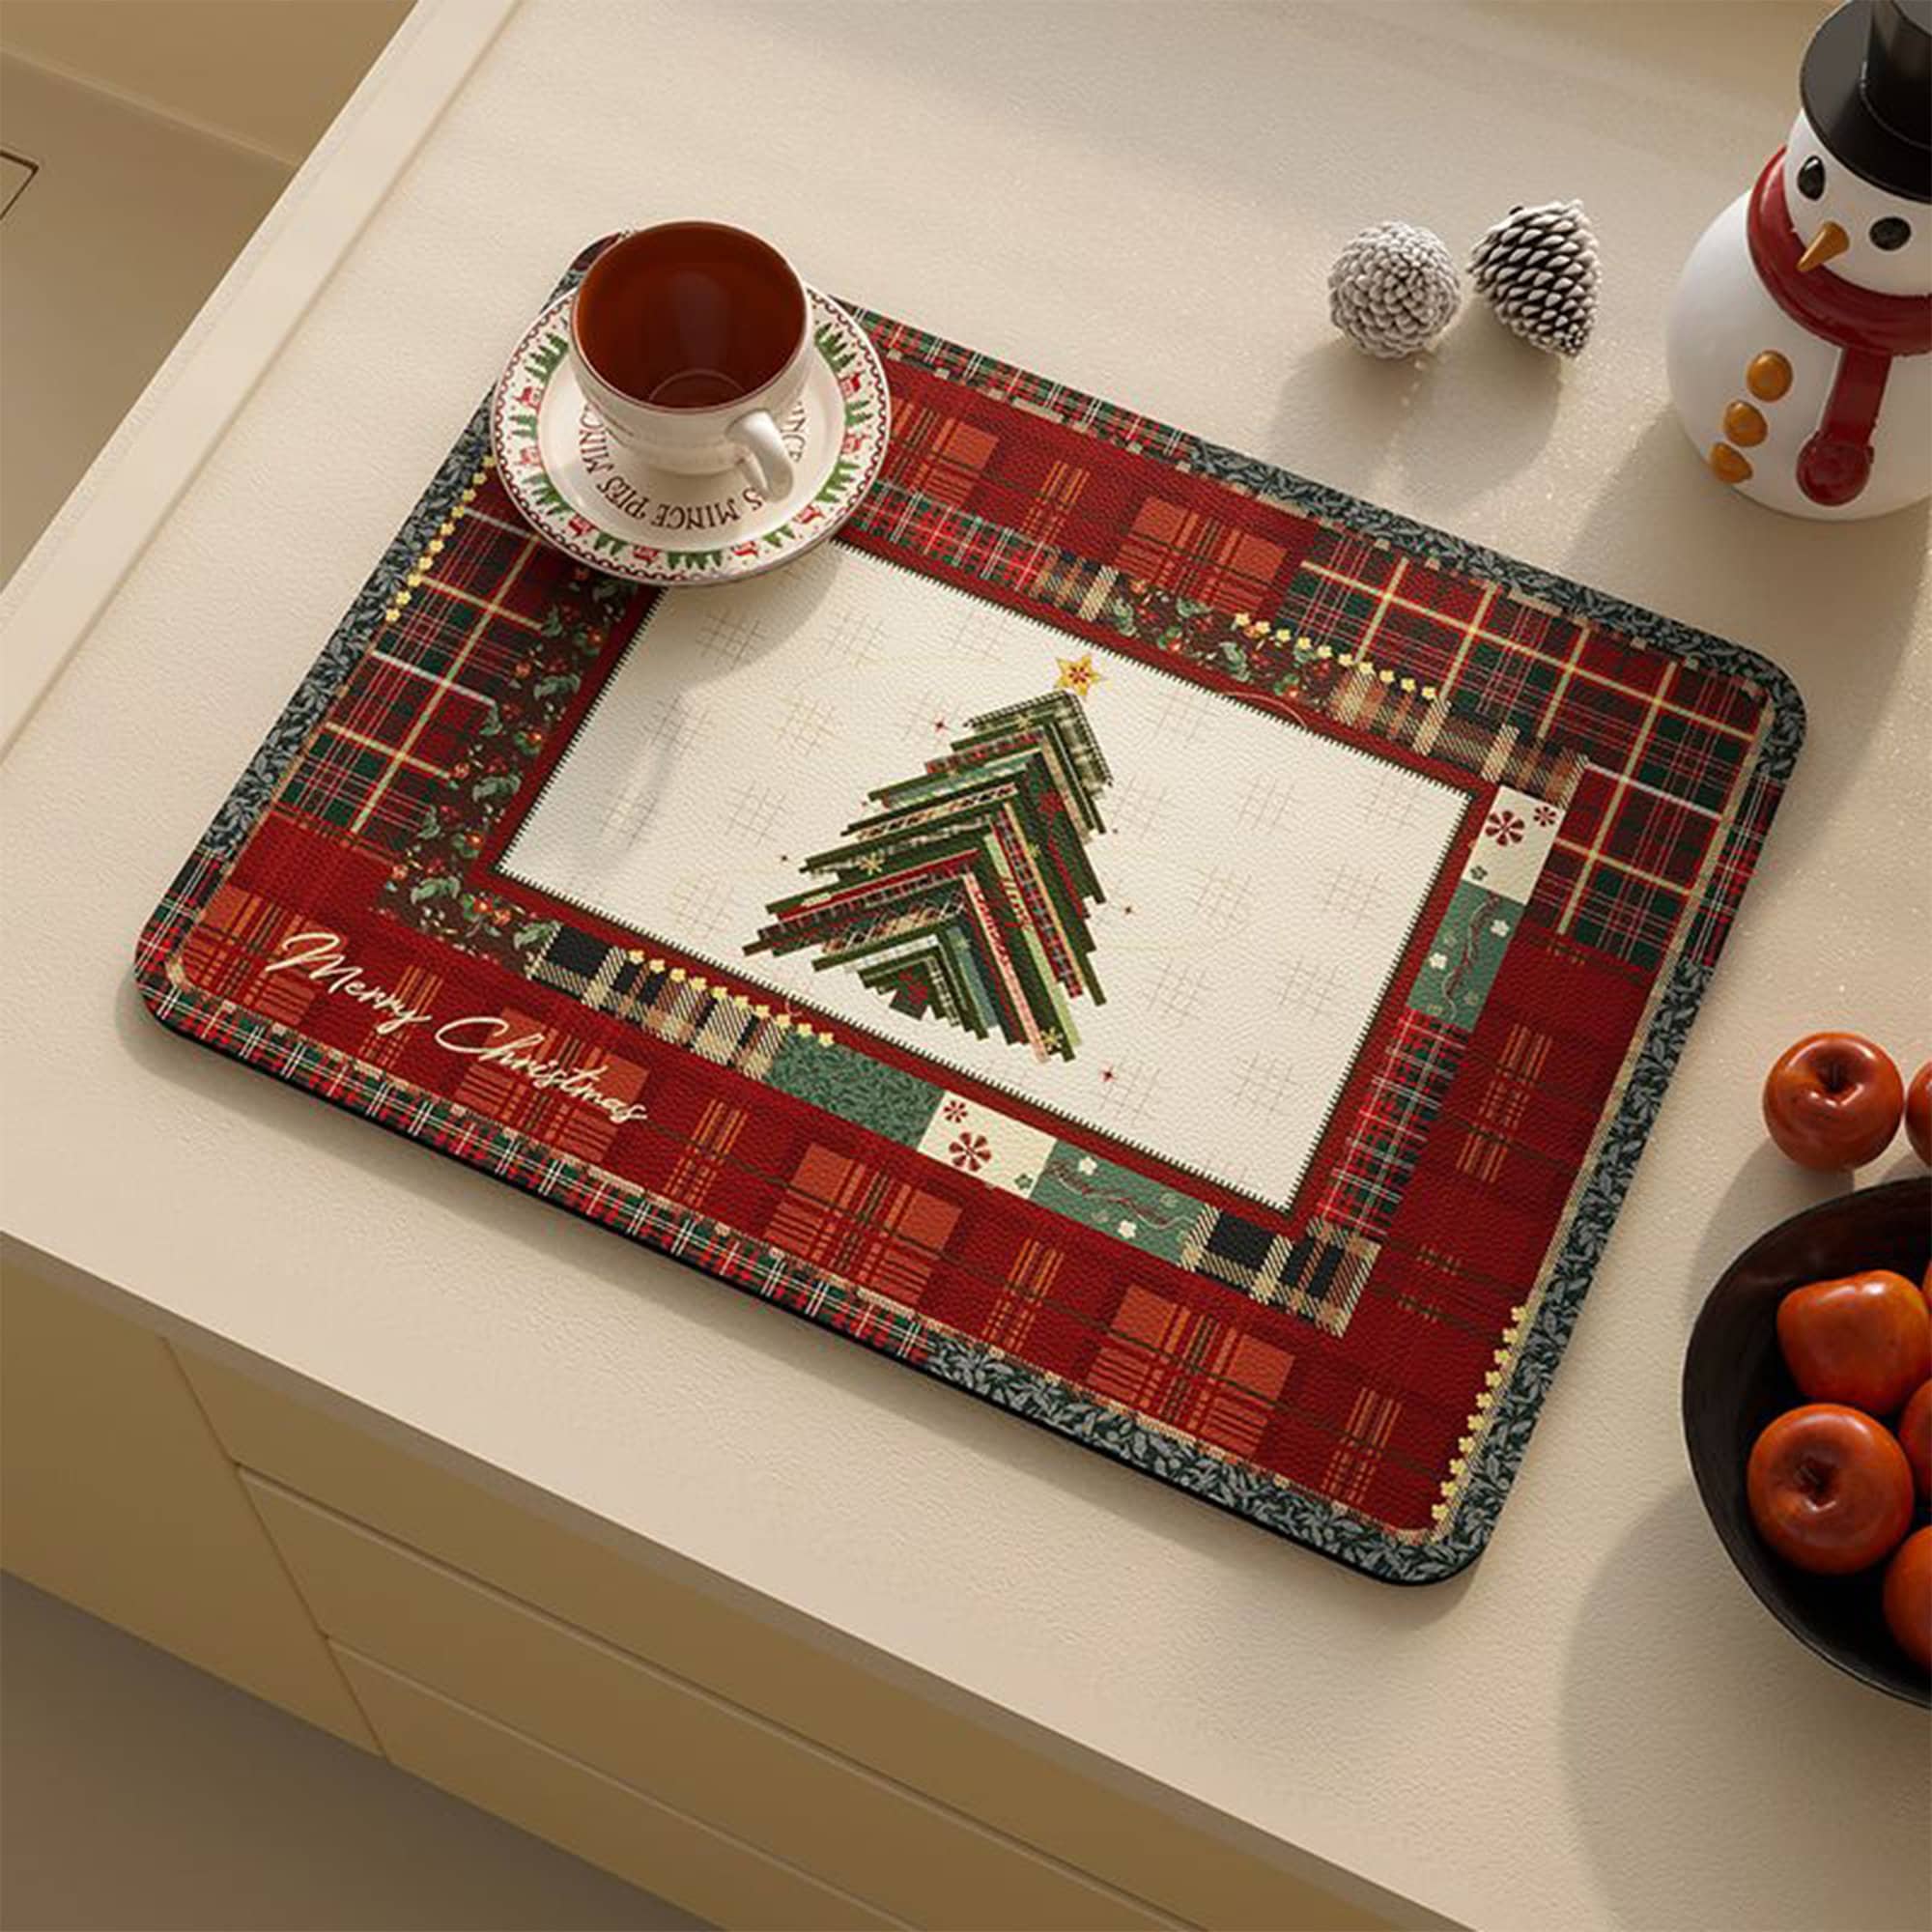  Christmas Dish Drying Mat for Kitchen Counter Xmas Tree Ball  Drying Pad Absorbent Drying Mats for Countertops Sinks Draining Racks Beach  Snowman Reversible Drainer Xmas Decor 18x24 Inch: Home & Kitchen